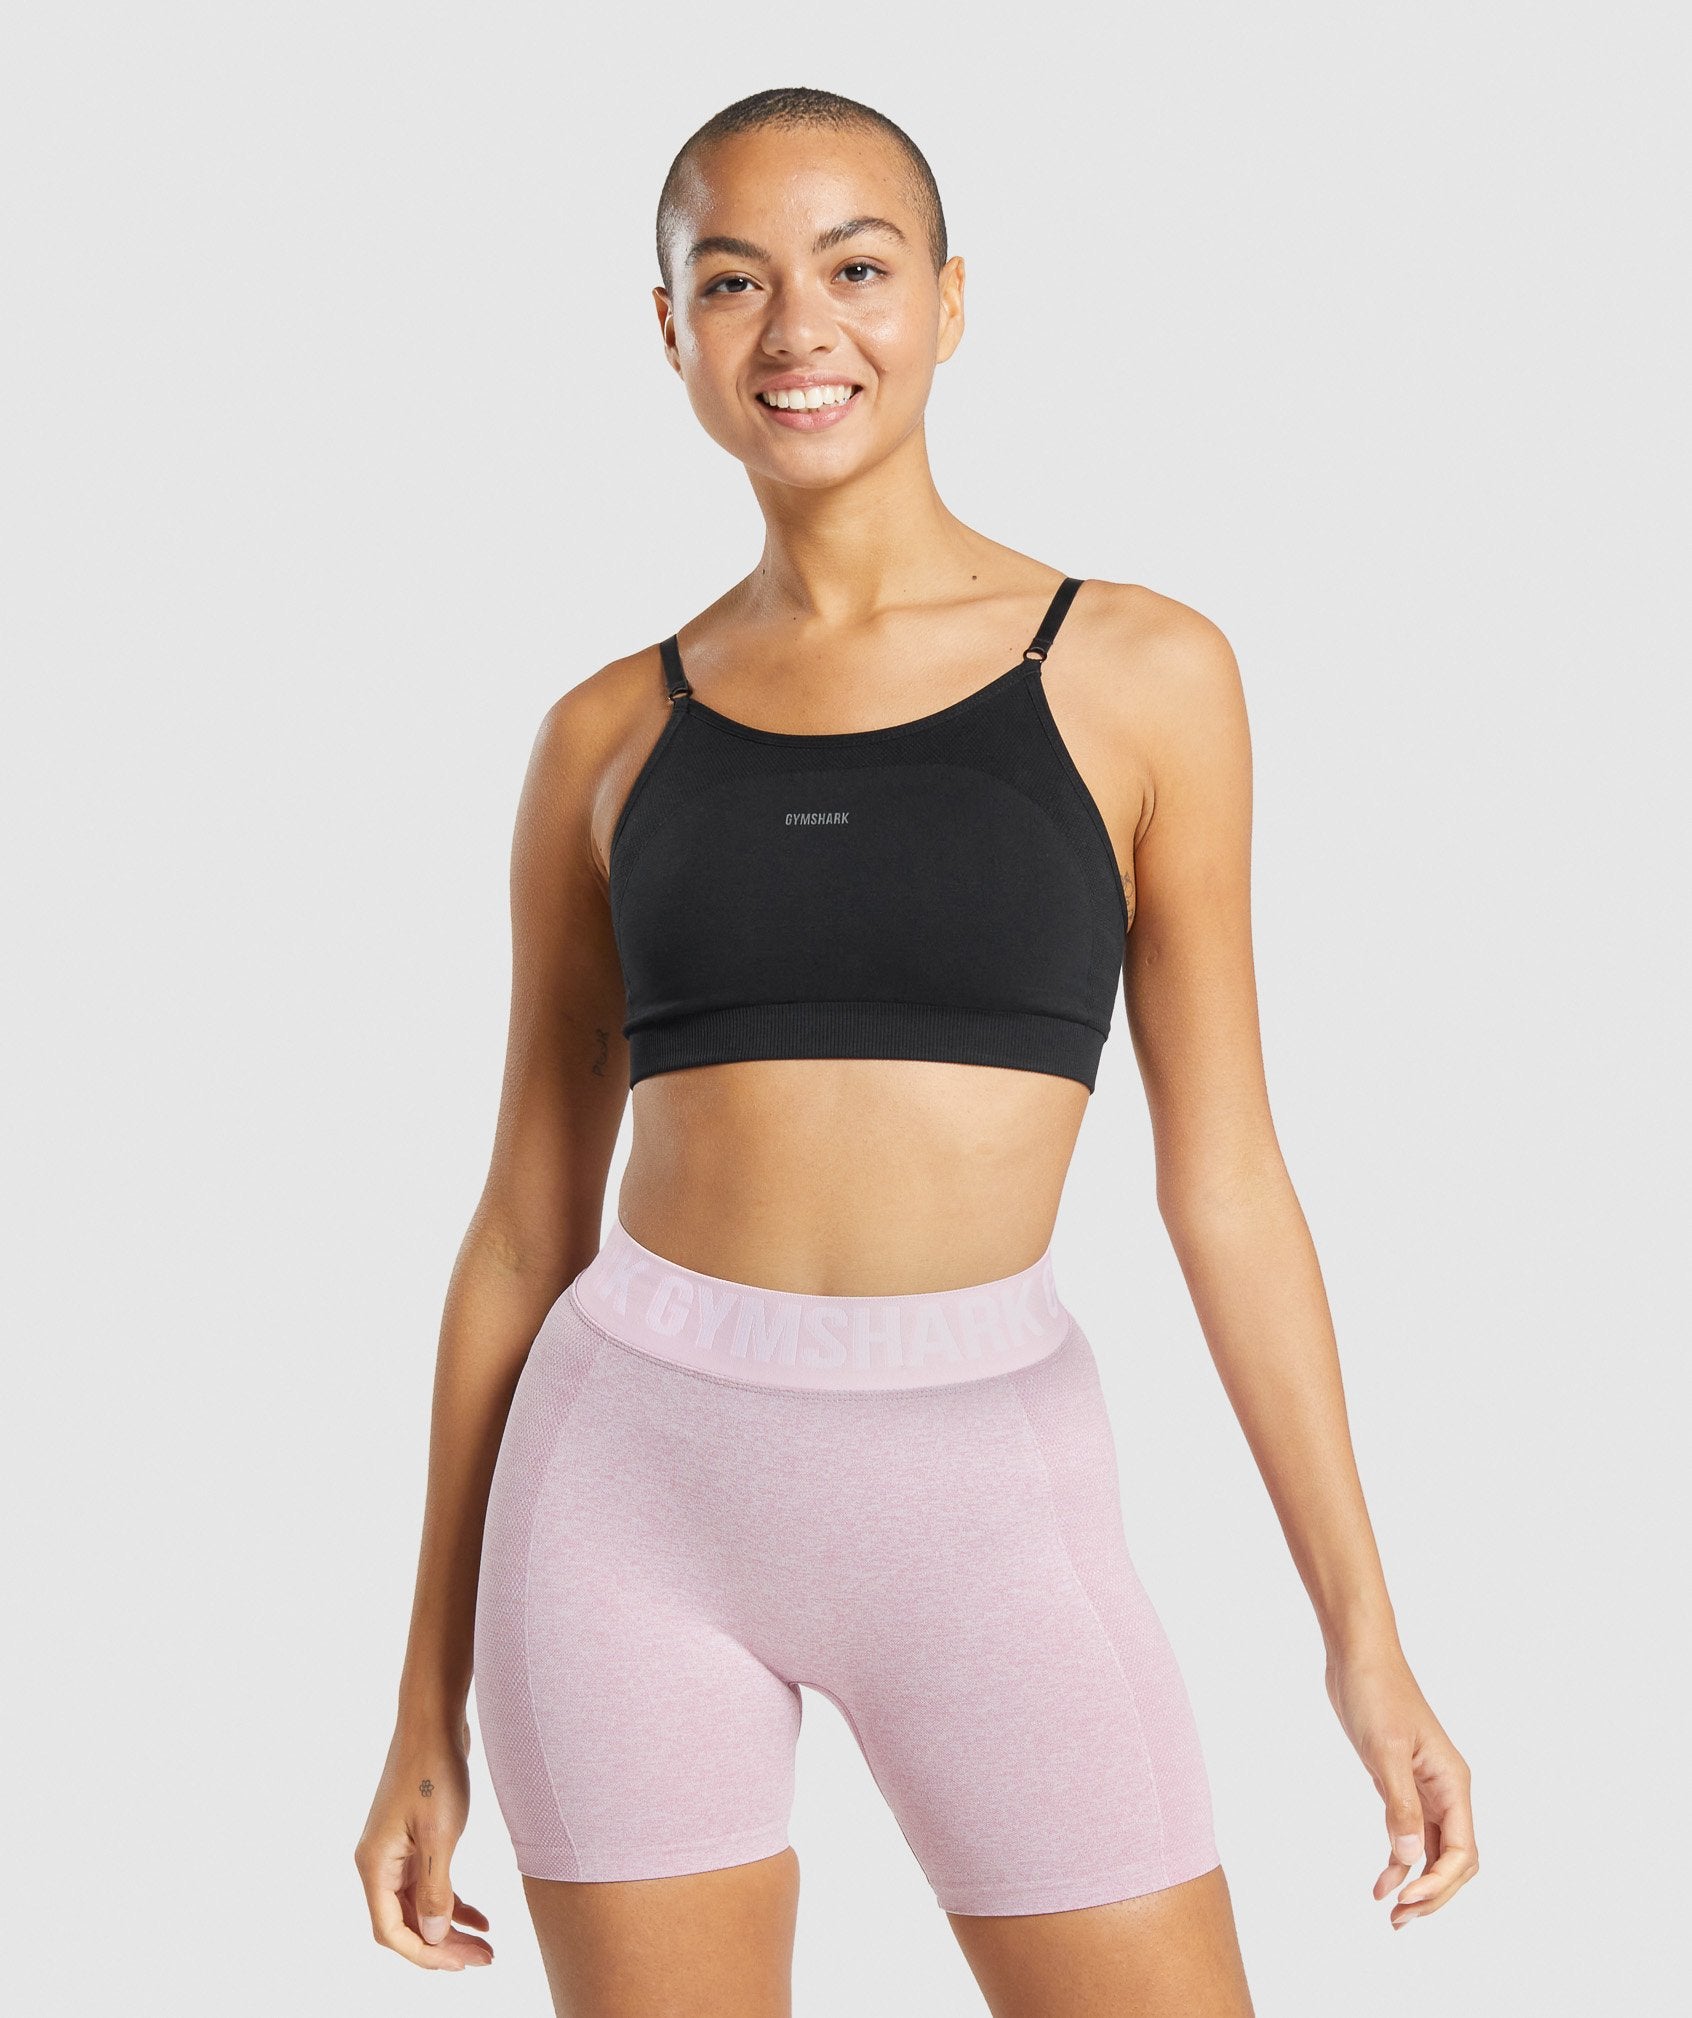 Best Selling Shopify Products on eu.gymshark.com-1